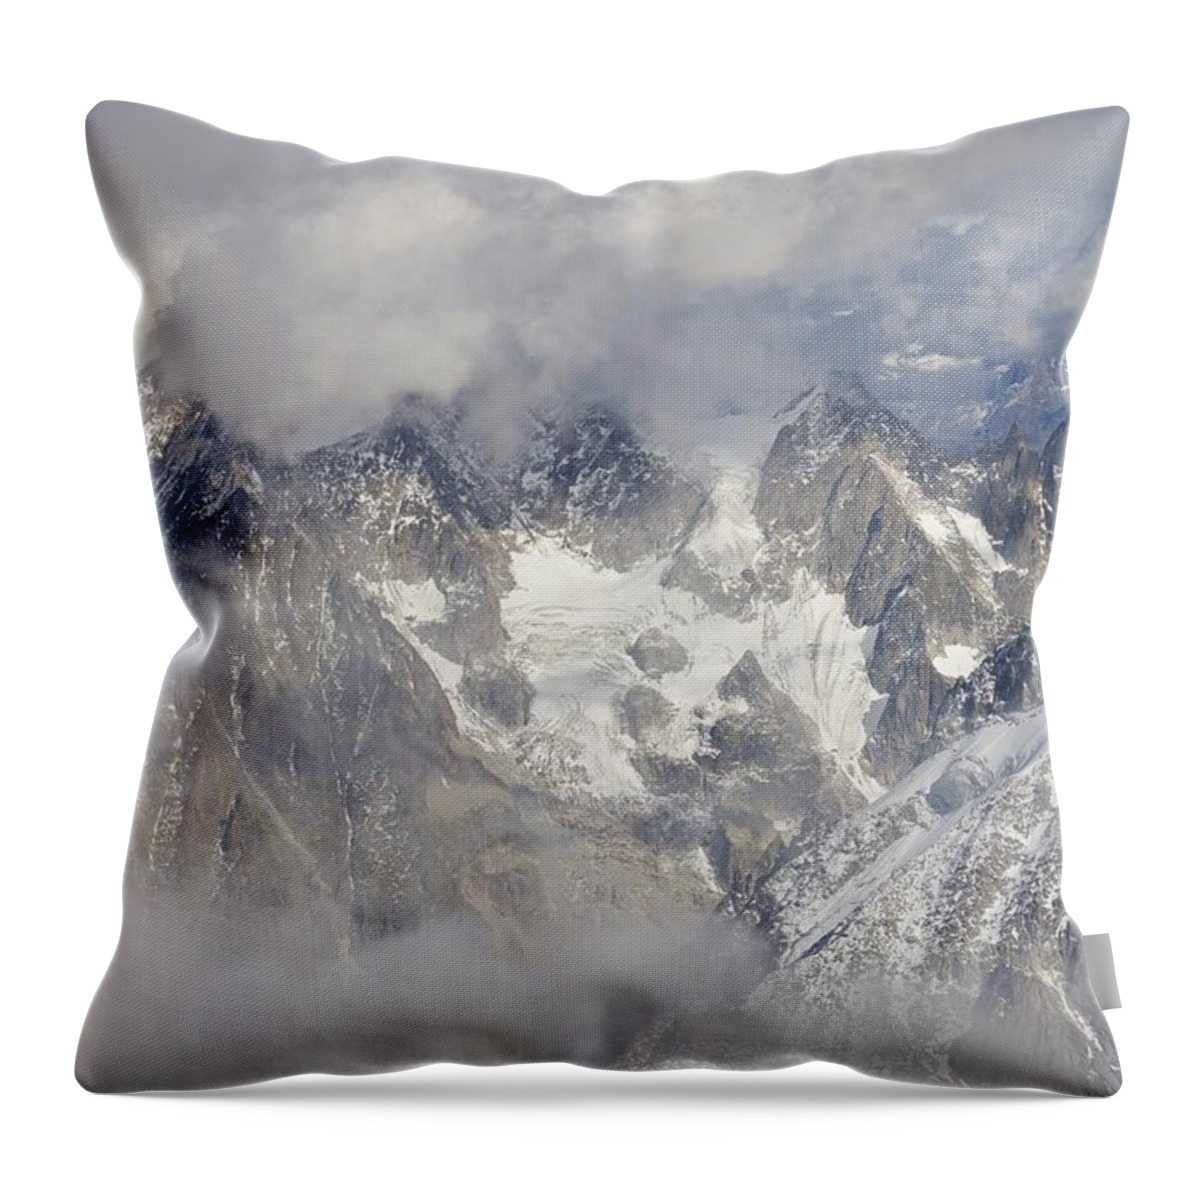 Aiguille Du Midi Throw Pillow featuring the photograph The Devils Teeth by Stephen Taylor